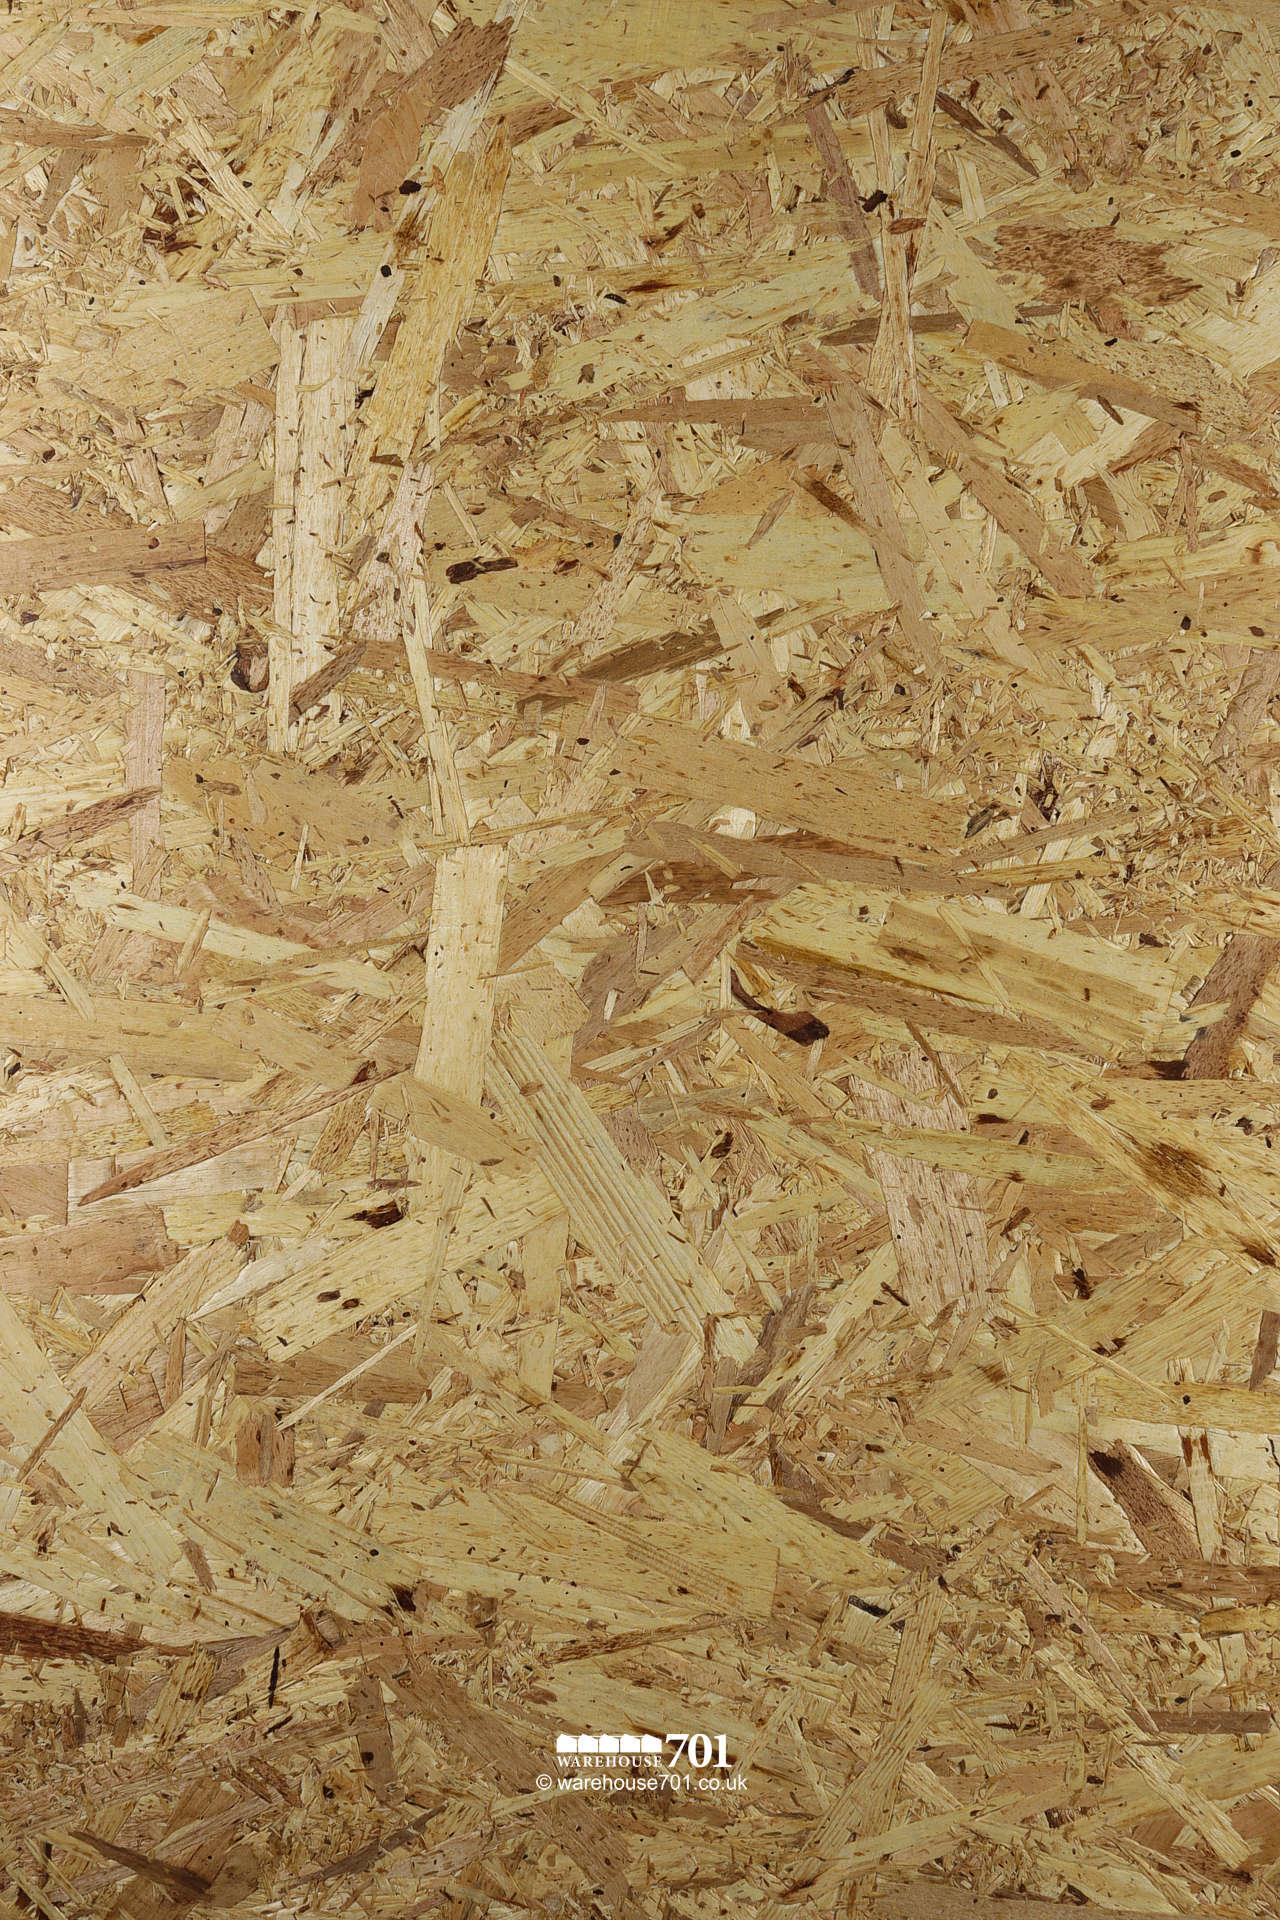 NEW Kronospan® OSB3 (Oriented Strand Board) or Sterling board for construction and DIY #3